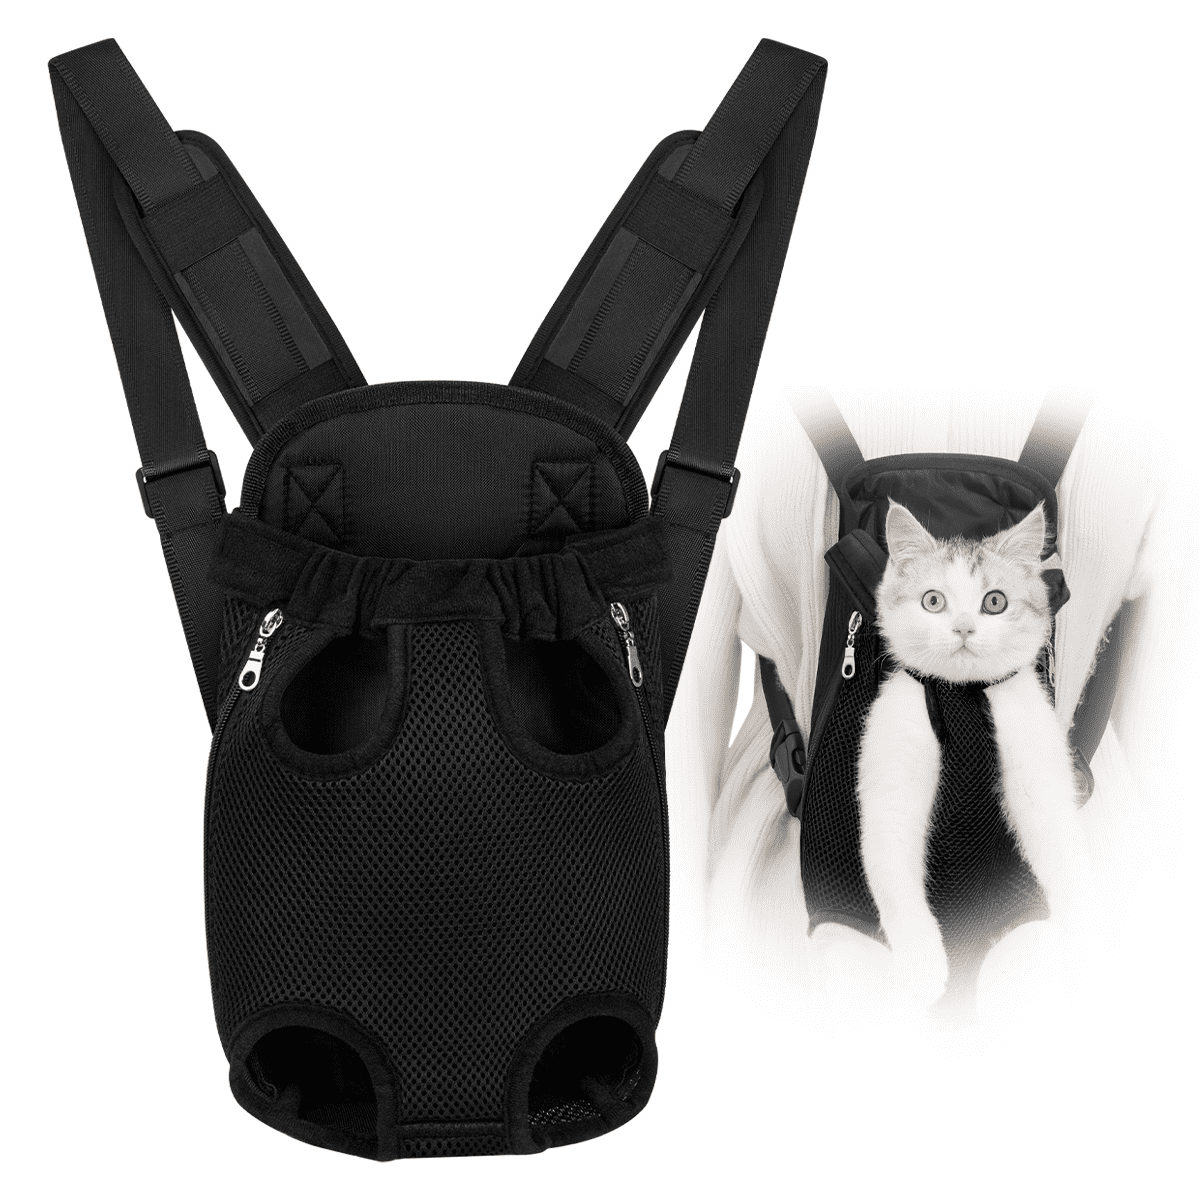  Adriene's Choice Luxury Pet Carrier, Puppy Small Dog Carrier,  Cat Carrier Bag, Waterproof Premium PU Leather Carrying Handbag for Outdoor  Travel Walking Hiking Shopping… : Pet Supplies